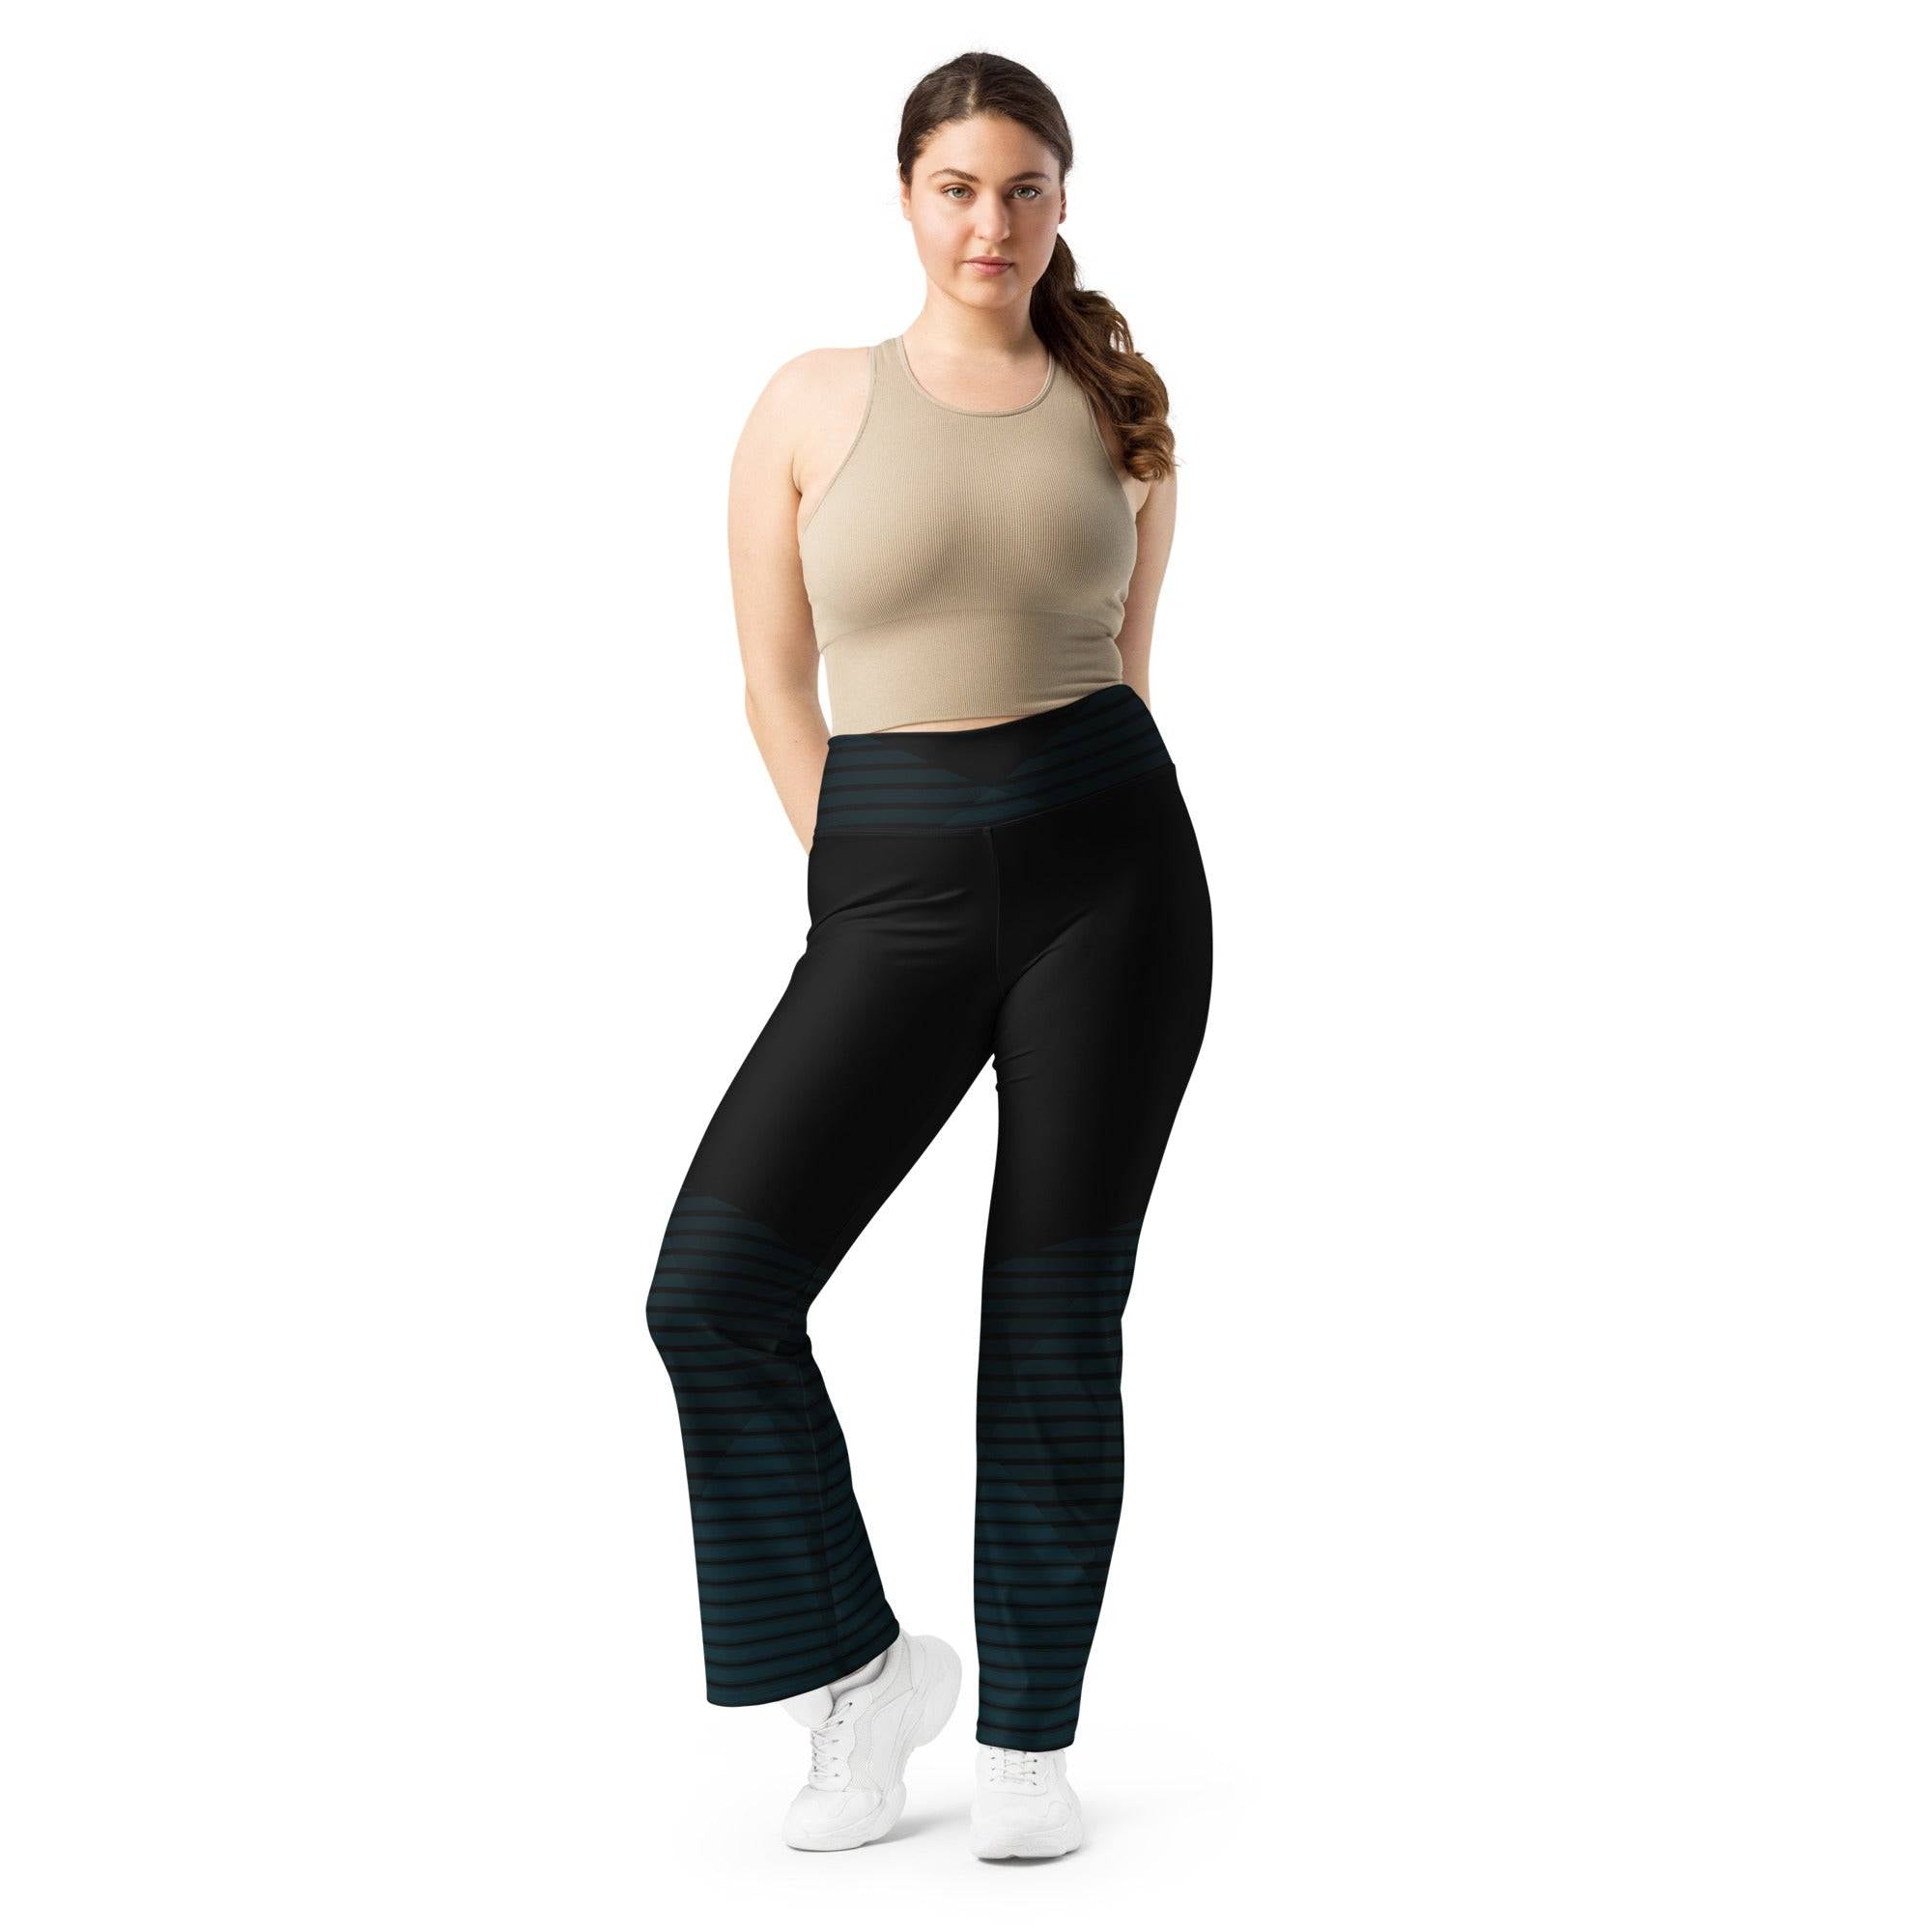 Model wearing Black Flare Leggings. Revive Wear's curve-hugging black flared leggings feature an on-trend flared cut that lifts and shapes. Shop from small to plus sizes with free shipping.